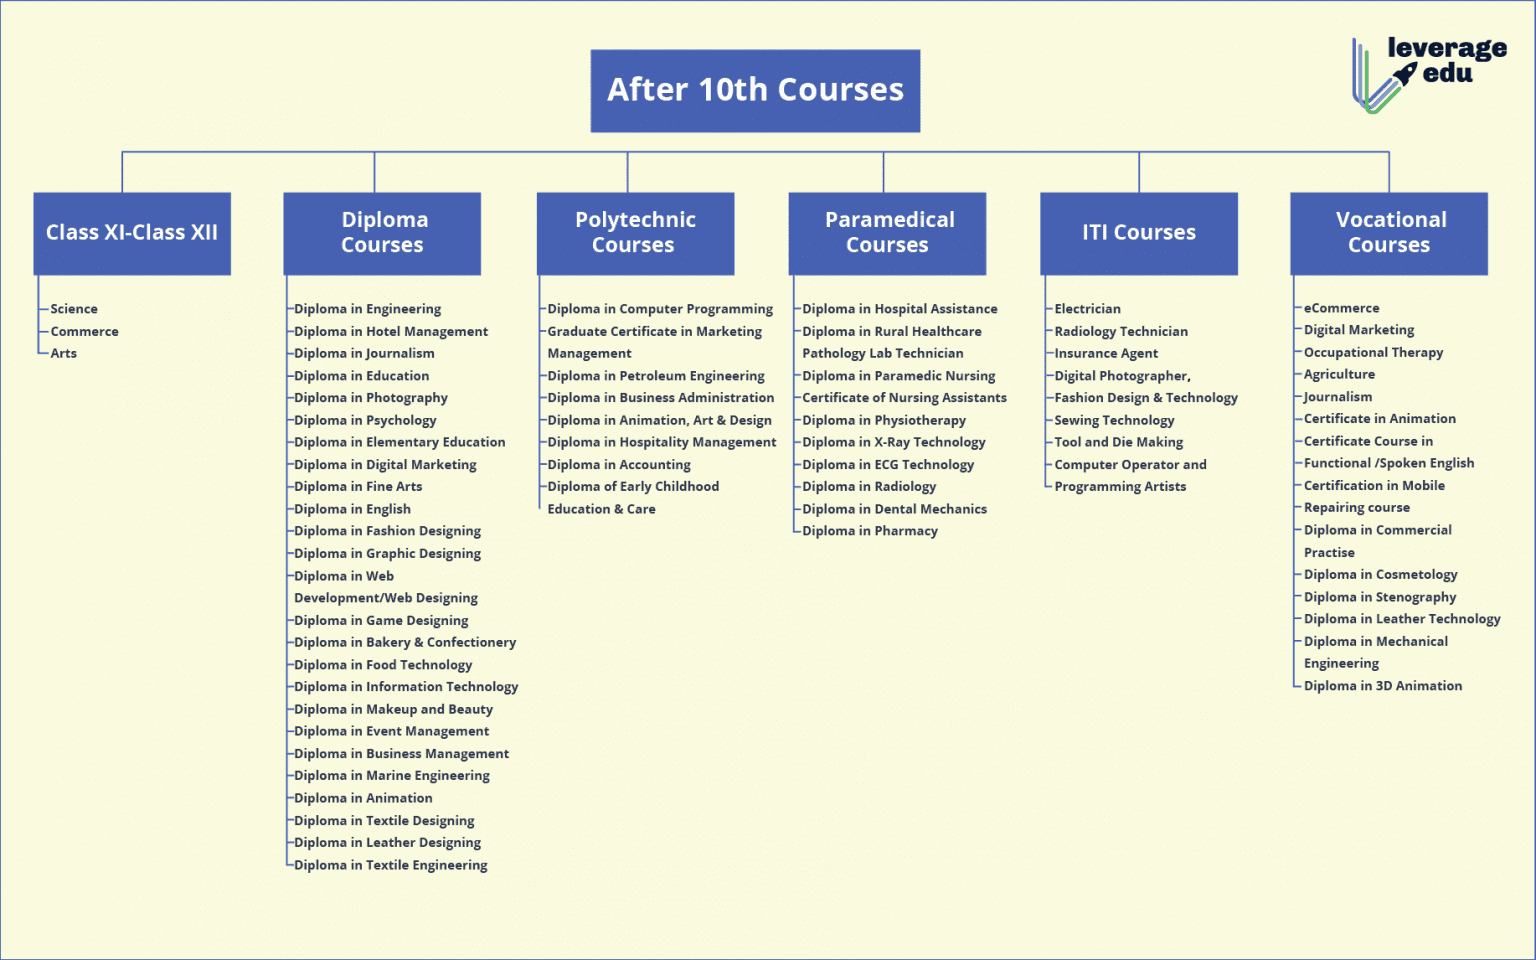 travel and tourism courses after 10th